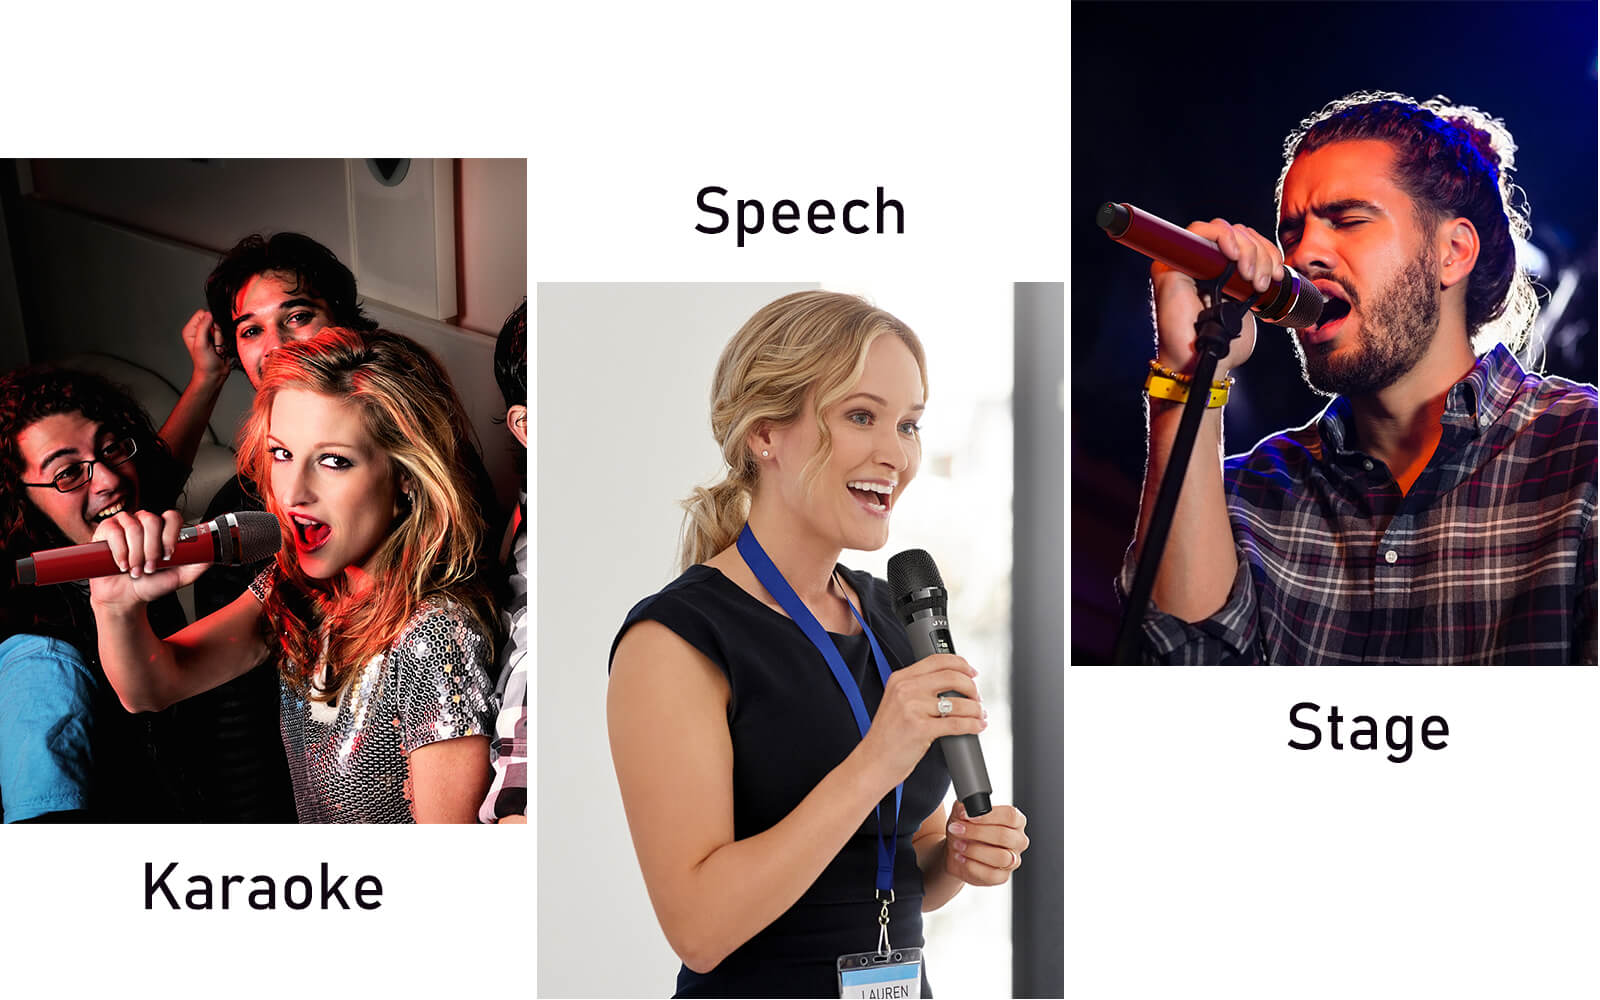 JYX U30 dual wireless microphones are used for karaoke party, speech and stage performing